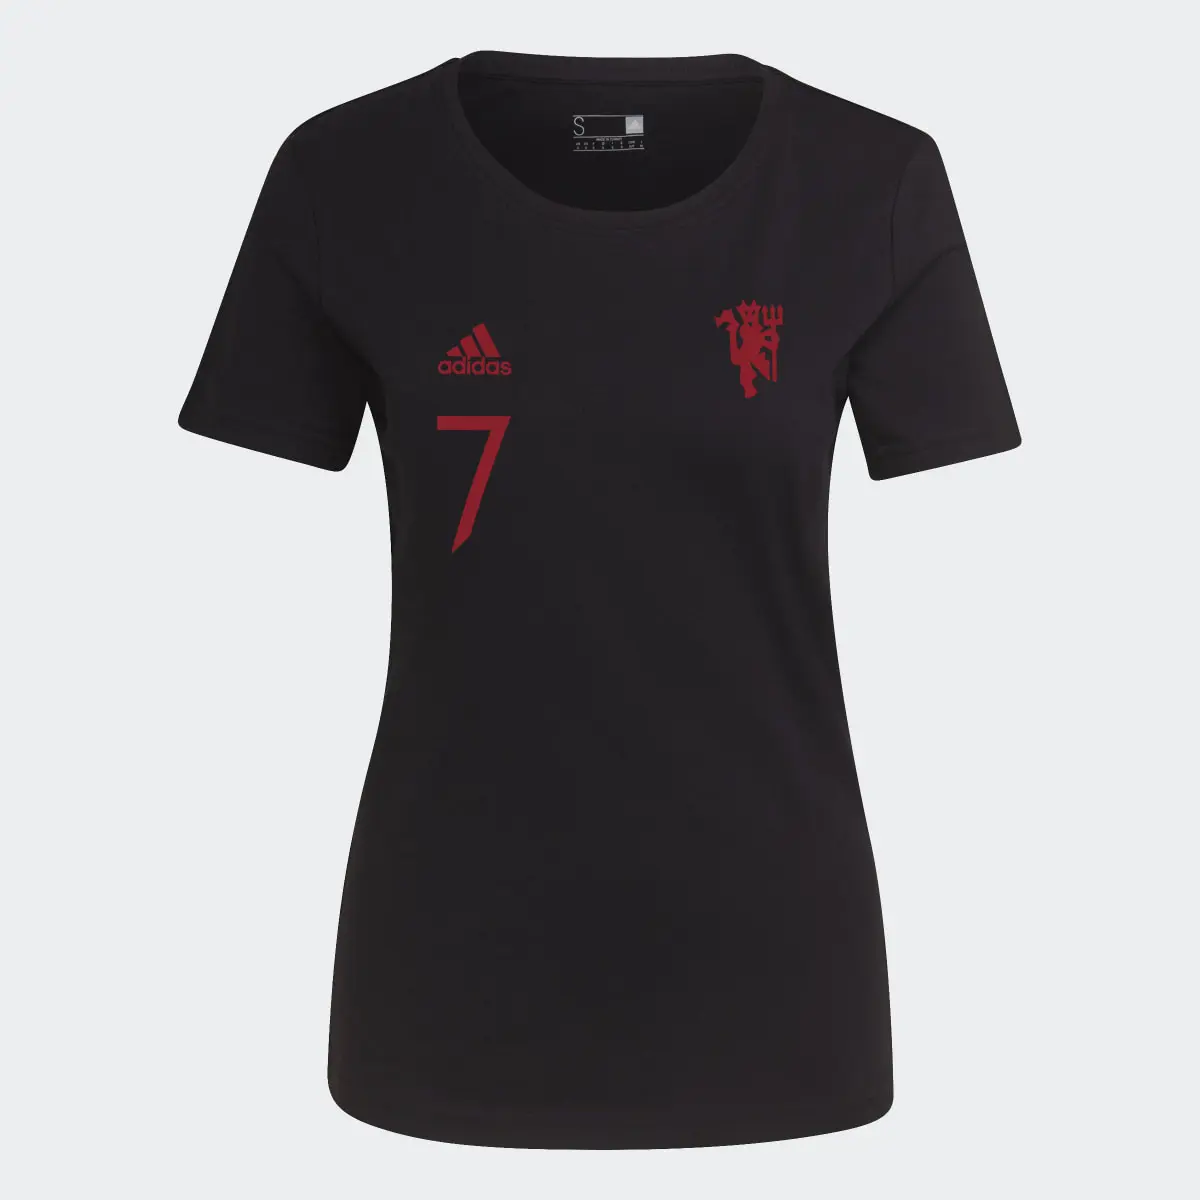 Adidas Manchester United Graphic T-Shirt. 1